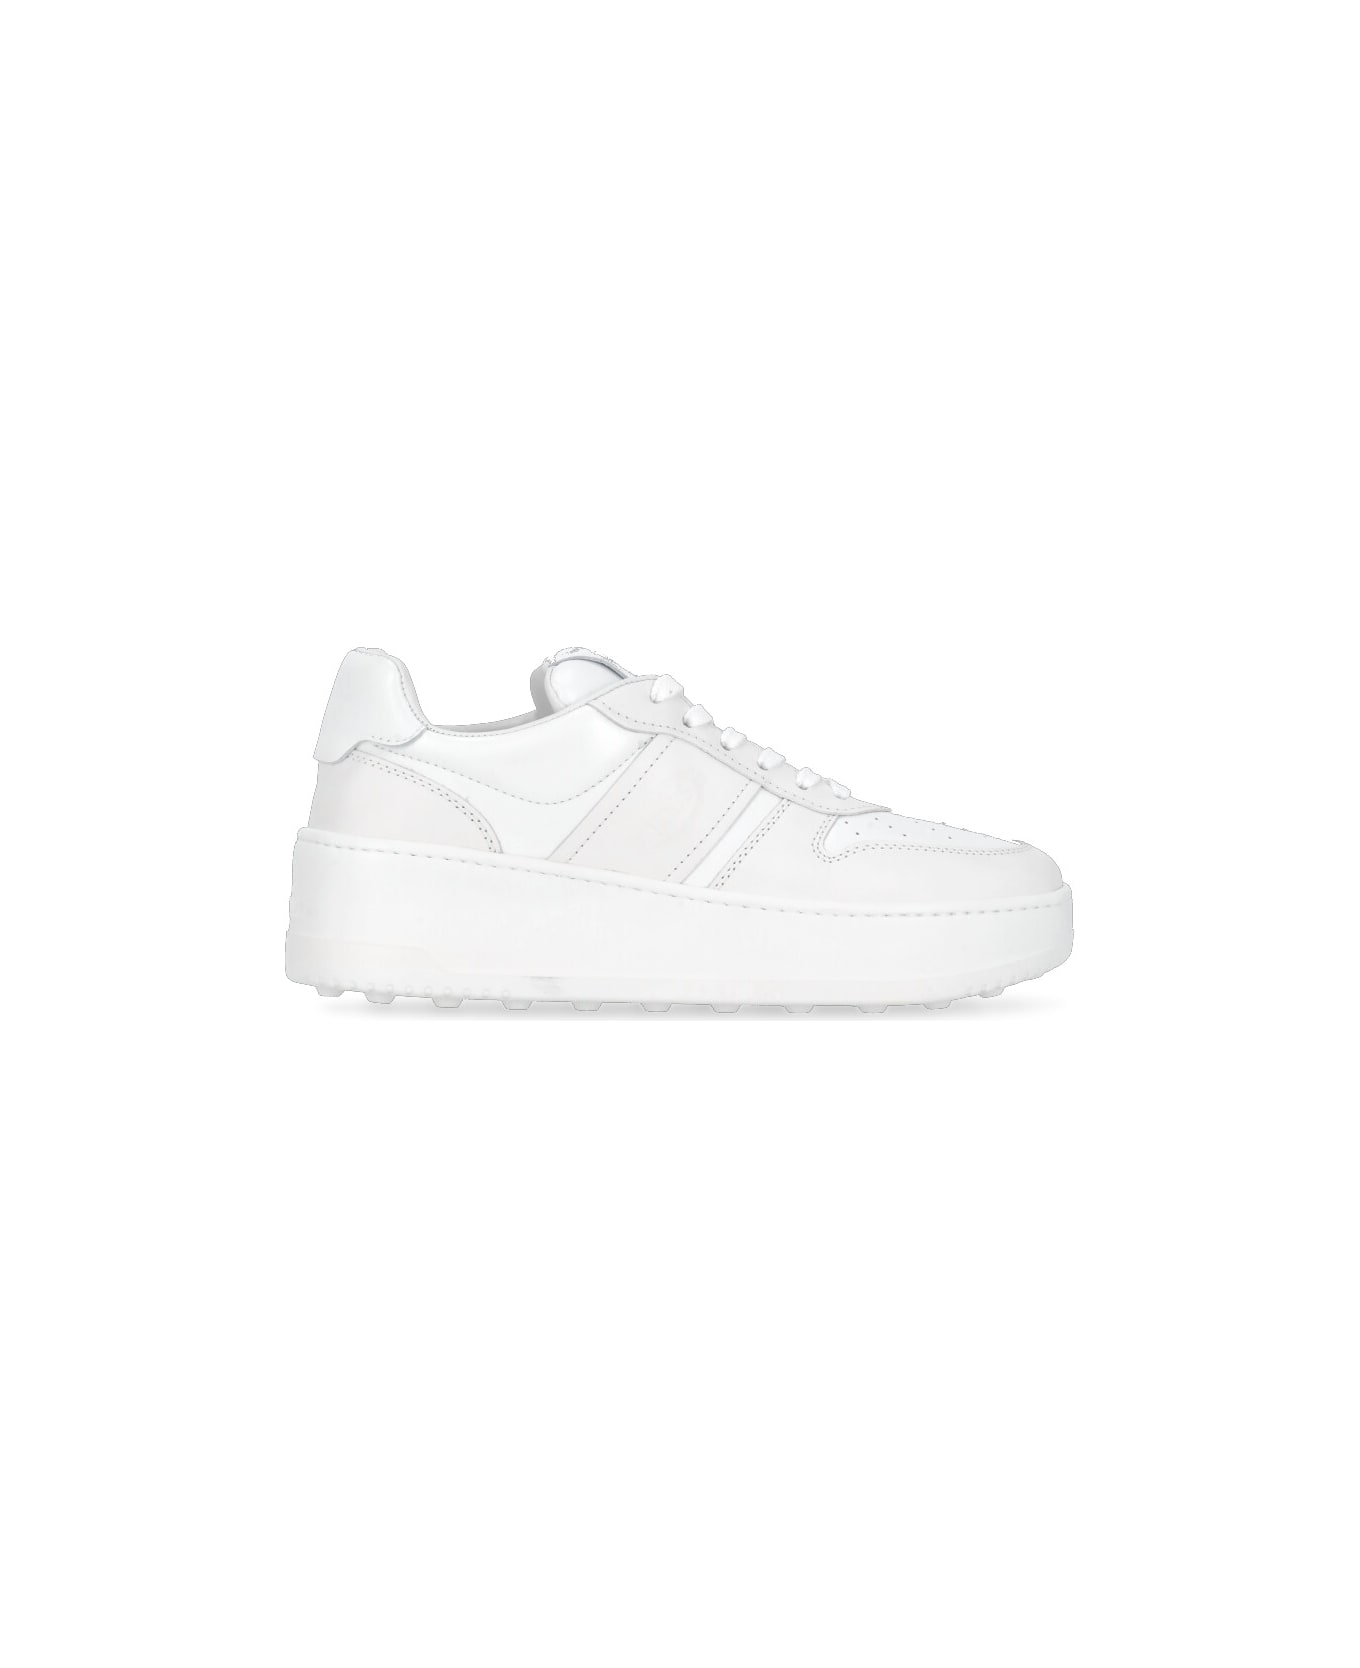 Tod's Leather Sneakers - White スニーカー